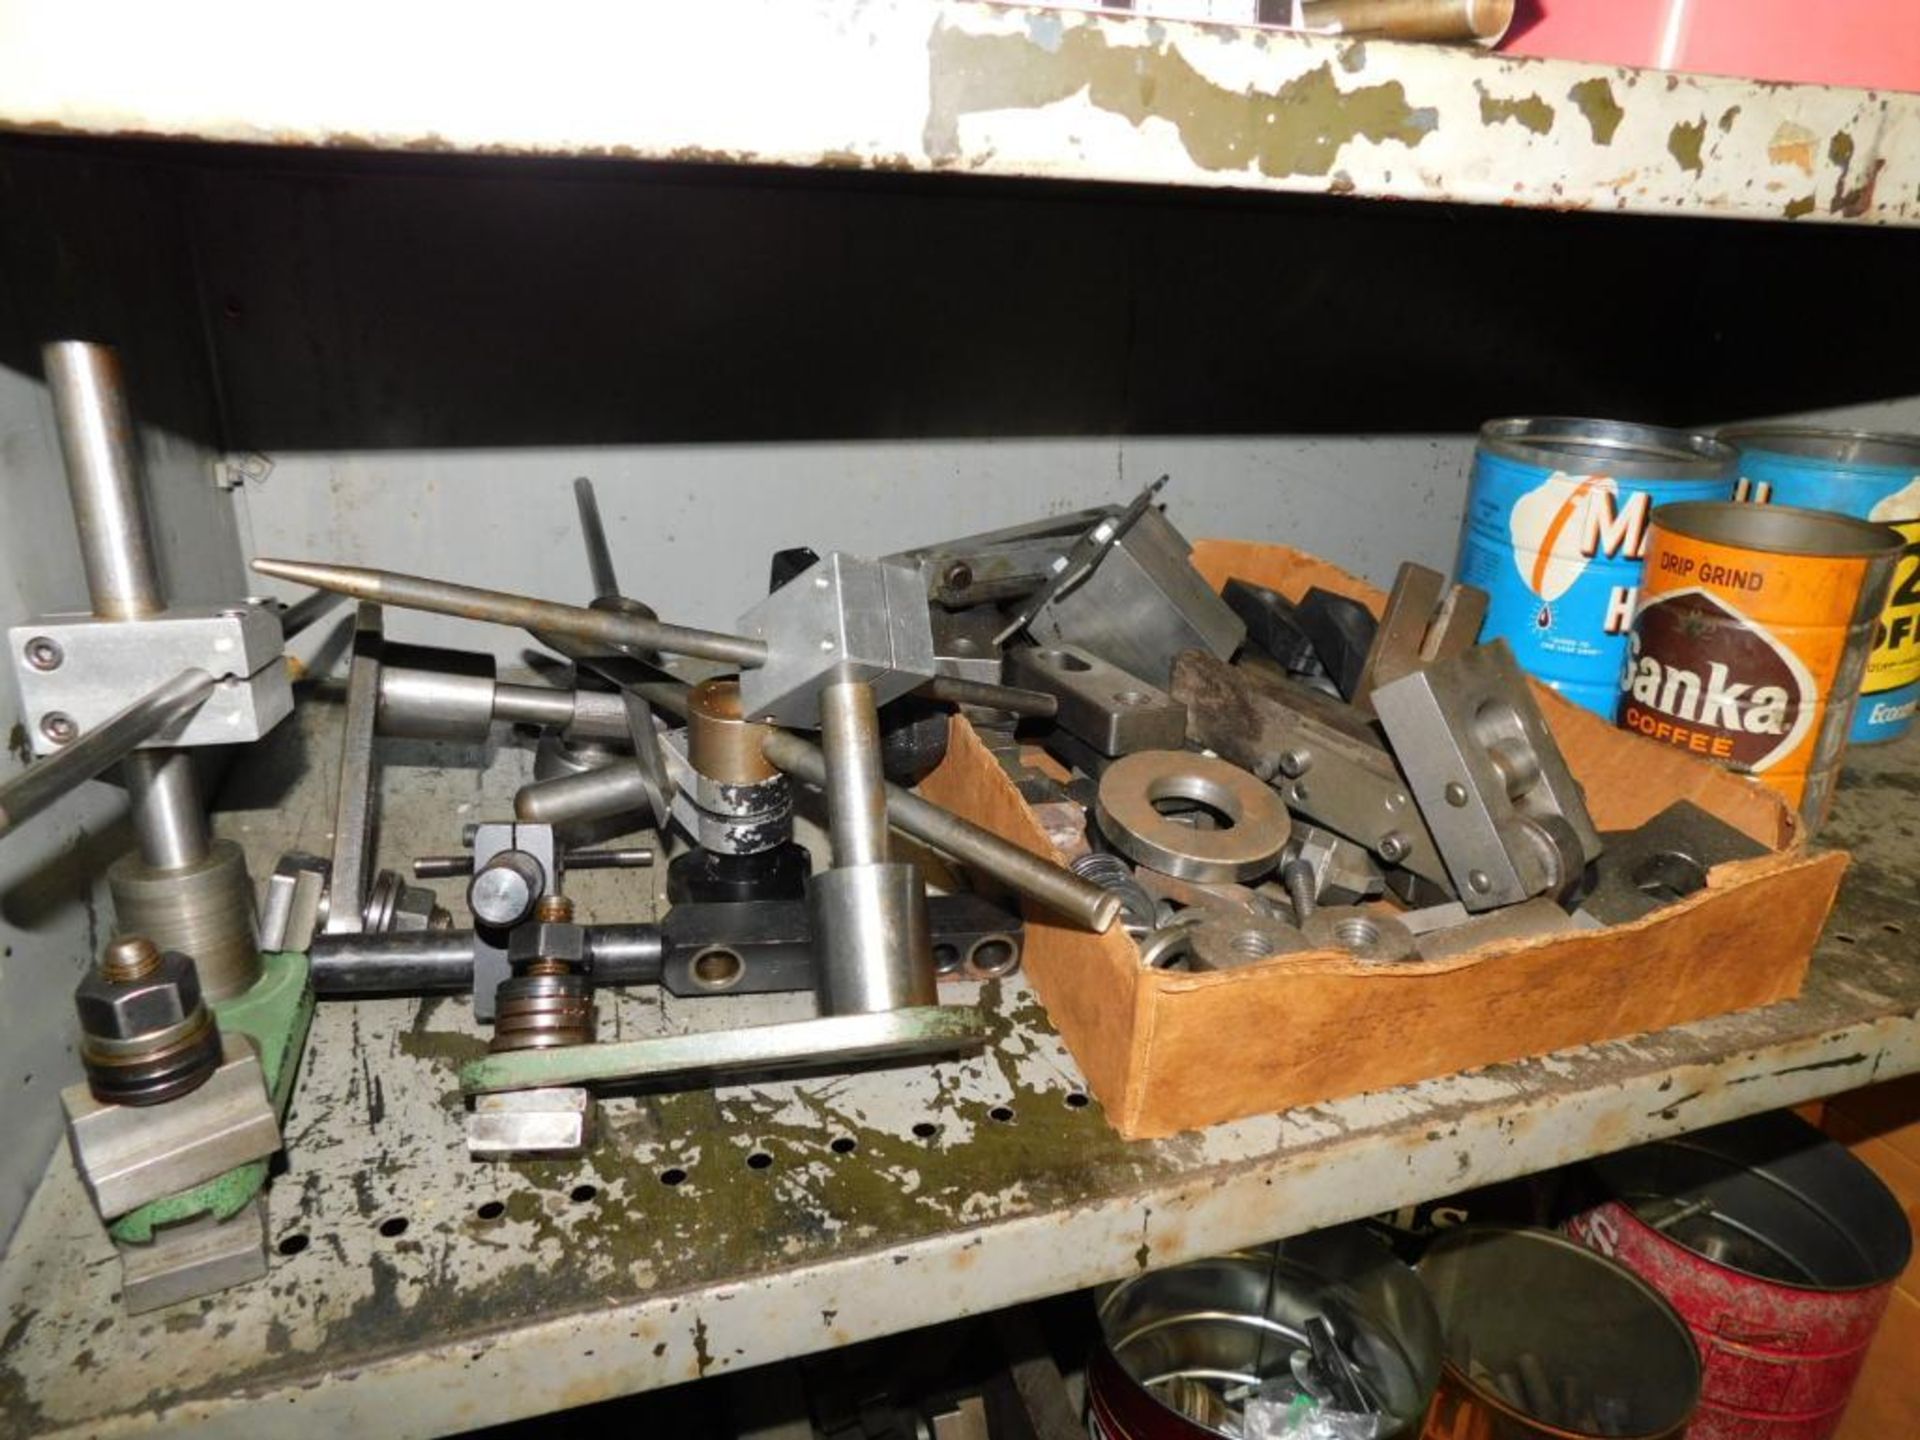 LOT: Metal Shelf w/Contents of Assorted Hardware, Steel Shim, Clamping Accessories, Hold Down Hardwa - Image 6 of 10